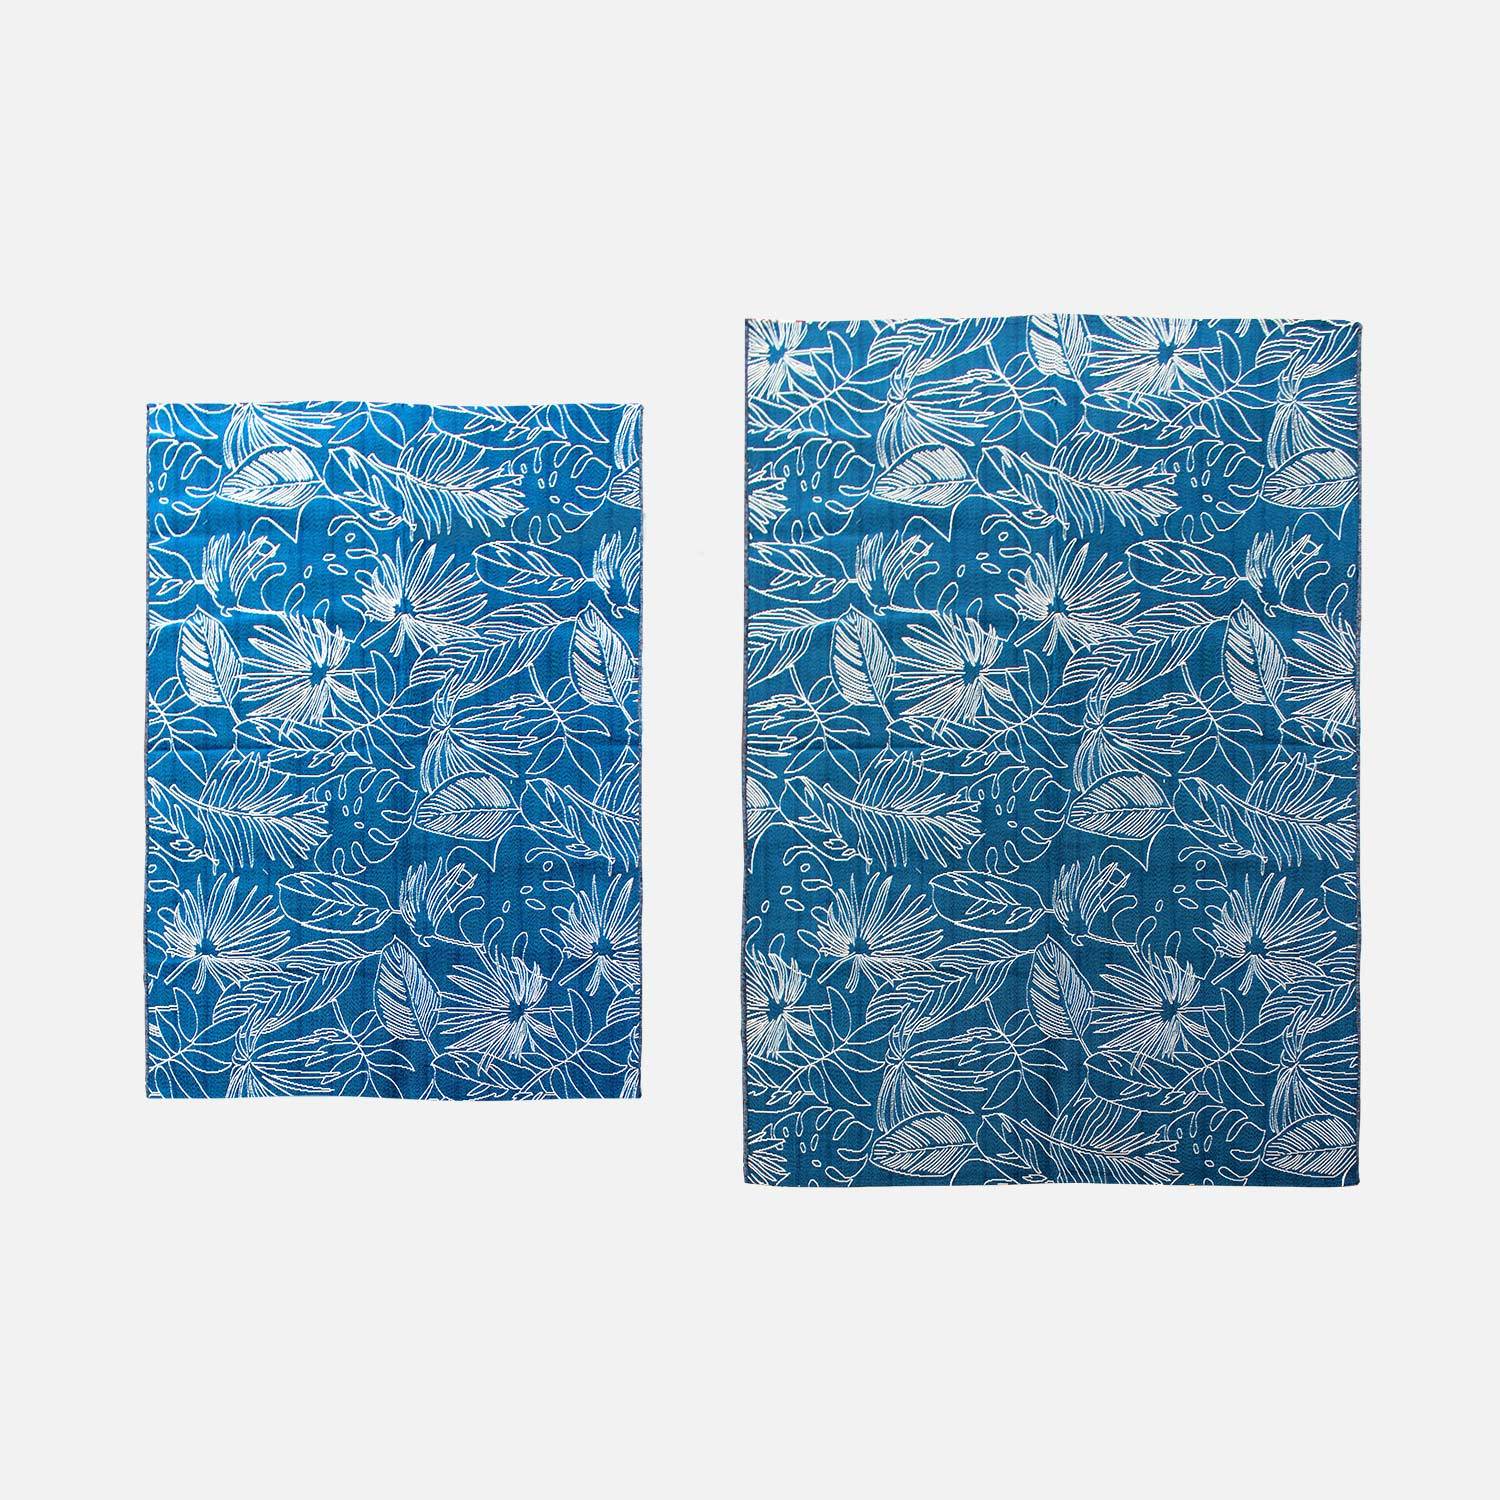 Outdoor rug - 160x230cm - rectangular, indoor/outdoor use - Exotic - Blue and white Photo3